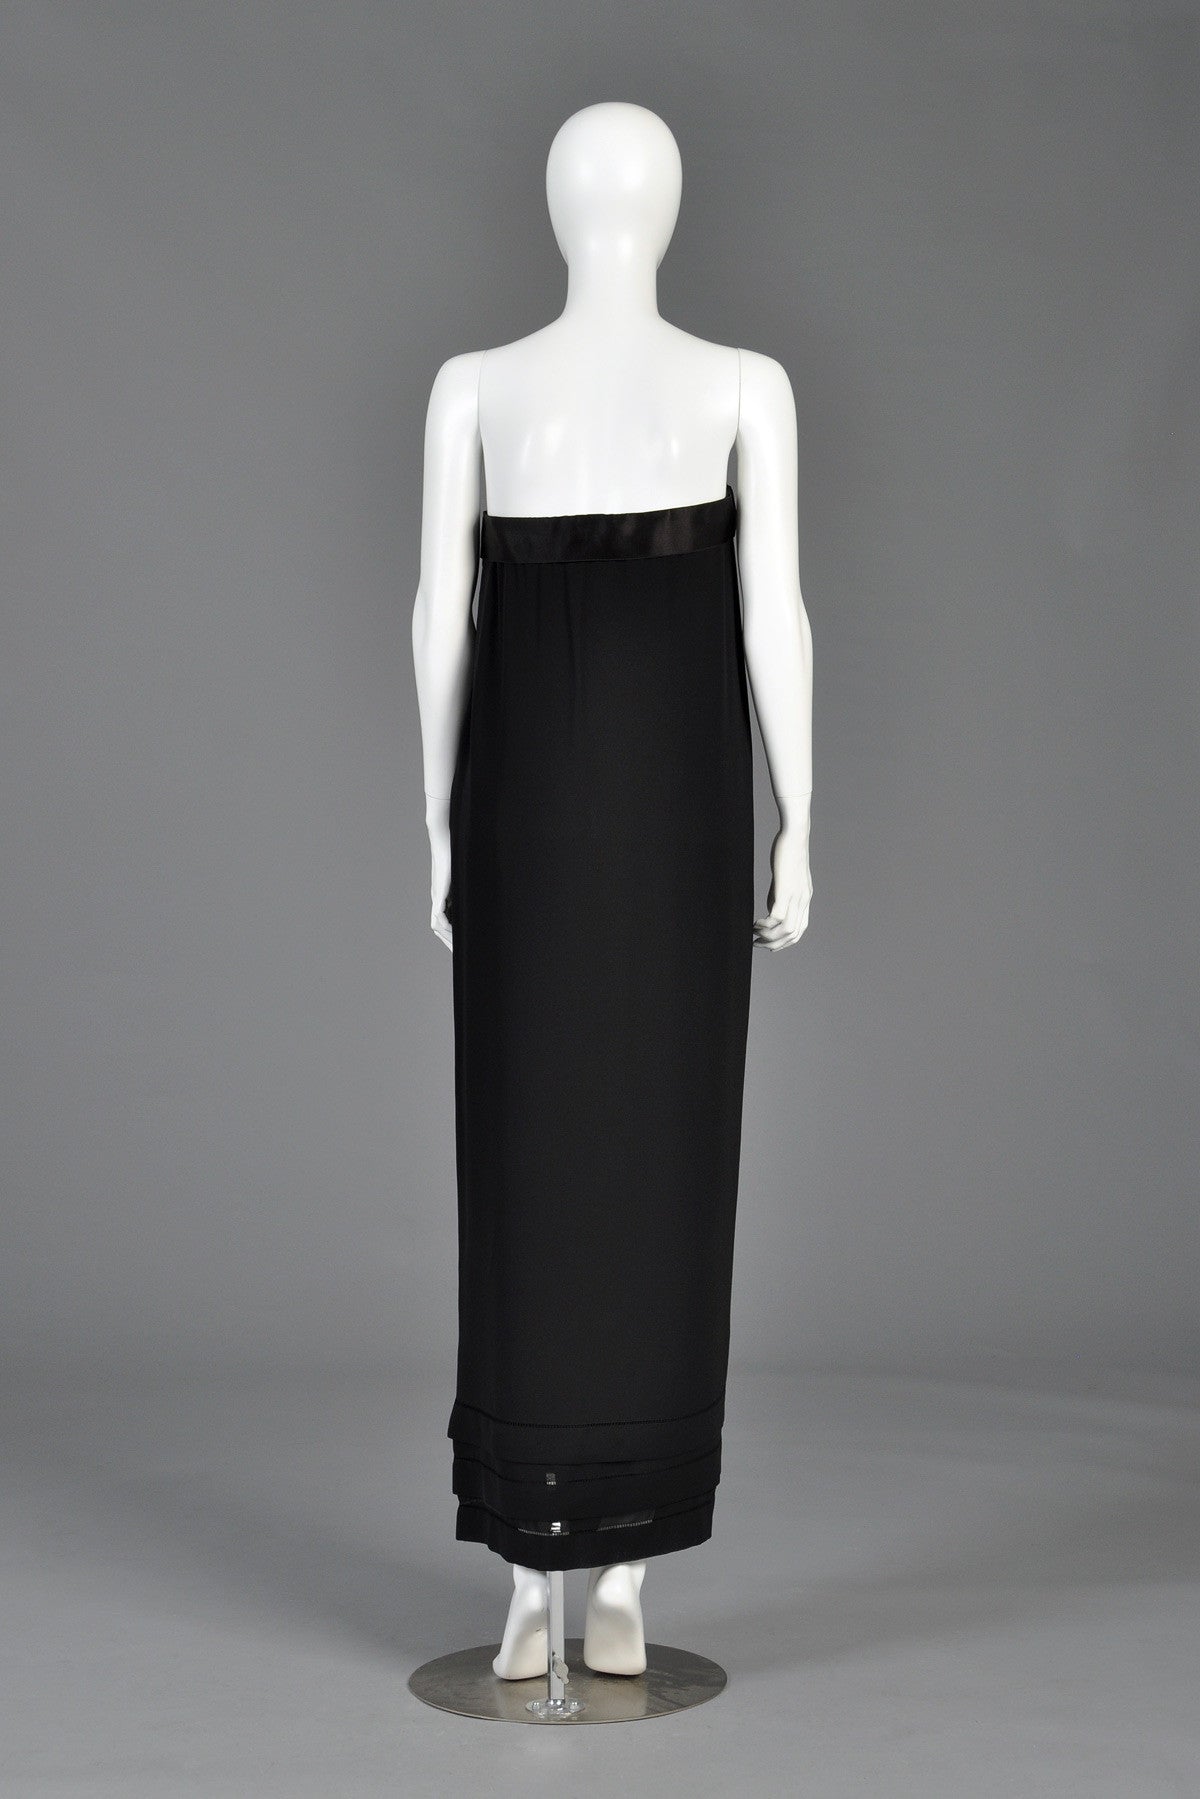 Late 1970s Guy Laroche Haute Couture Draped Gown | BUSTOWN MODERN